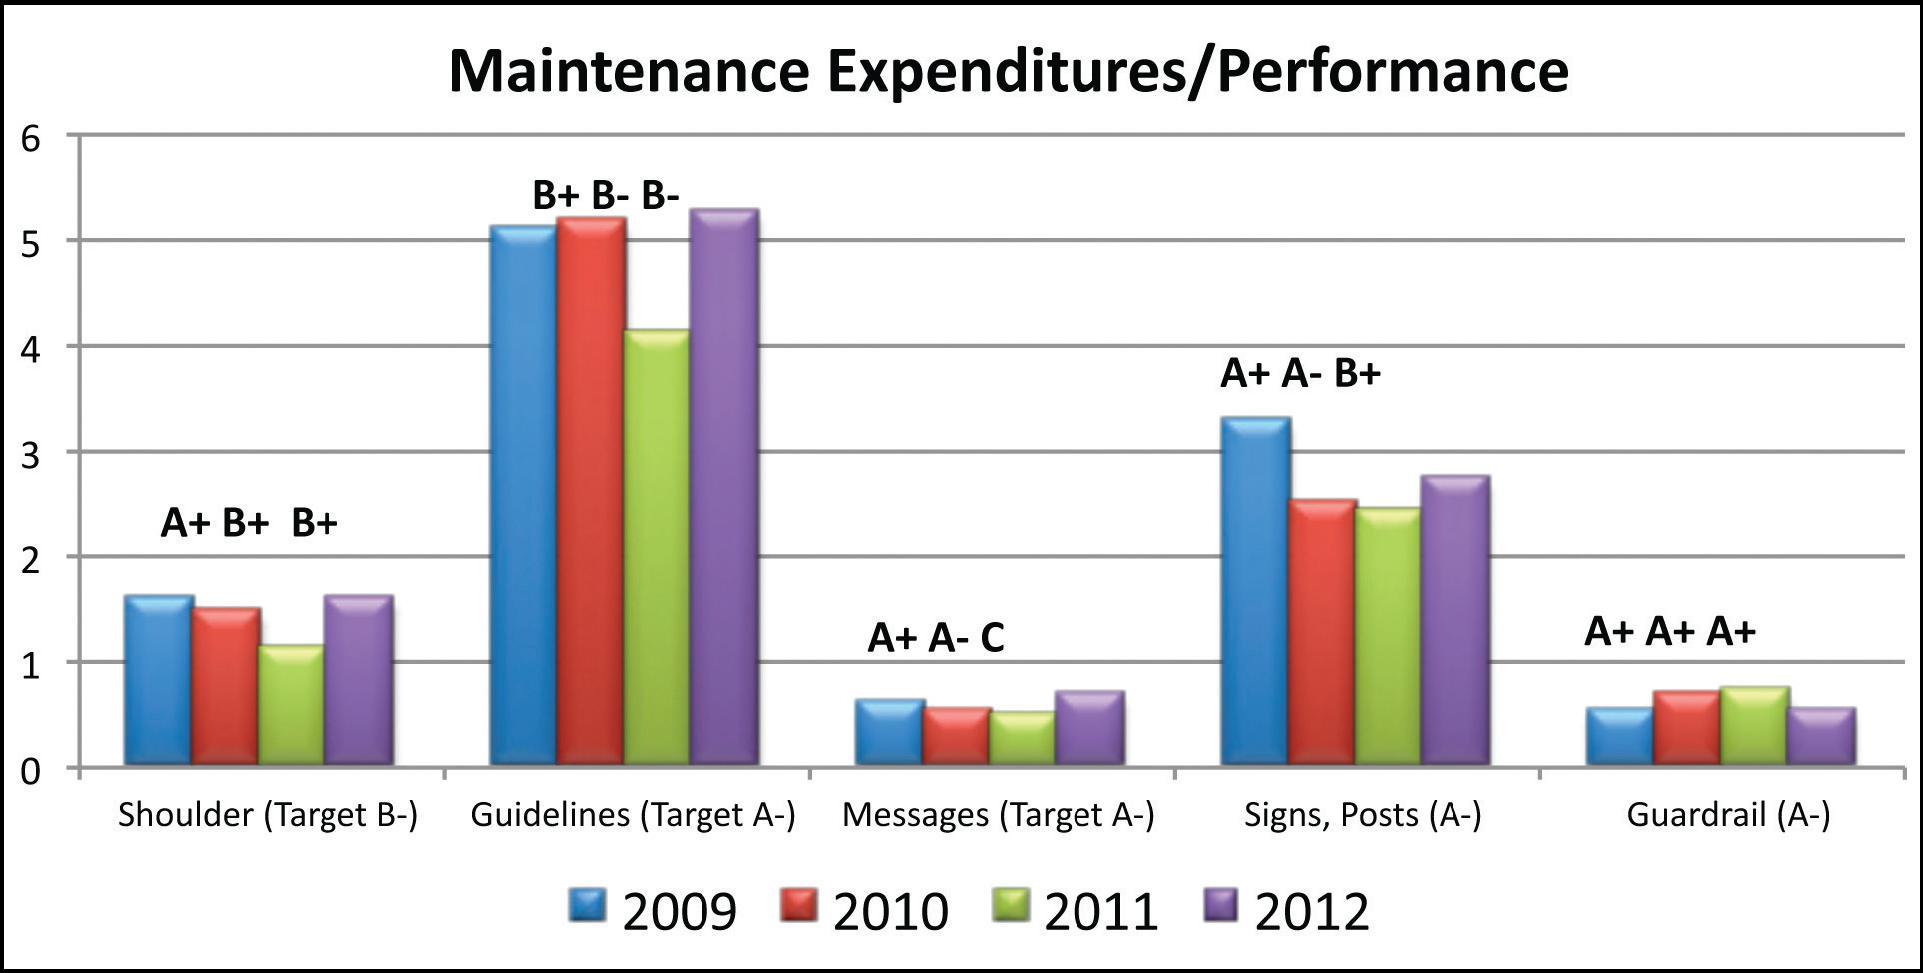 Figure 50 illustrates expenditure levels and targets for five categories of roadway maintenance for each of four years in Utah. The five categories are shoulder work, paint guidelines, pavement messages, signs and posts and guardrail.  Expenditures for shoulder work is about 1 point 5 million each year, while paint guideline budgets vary between approximately five million dollars and four million dollars annually.  Expenditures for pavement messages are around 500 thousand dollars annually and expenditures for guardrail are about 500 thousand dollars annually.  The targets for each also are illustrated as are the scores. The targets for shoulder work is B minus and the scores are A plus, B plus, and B plus for the years 2009, 2010, and 2011.  The targets for paint guidelines are A minus while the conditions are B plus in 2009, B minus in 2010 and B minus in 2011. The targets for pavement messages is A minus and the conditions are A plus for 2009, A minus for 2010 and C for 2009.  The targets for signs and posts are A minus while the conditions in 2009 were A plus, A minus in 2010 and B plus in 2012.  For guardrail the target is A minus. The condition in 2009 was A plus, the condition in 2010 is A plus and the condition in 2010 is A plus.